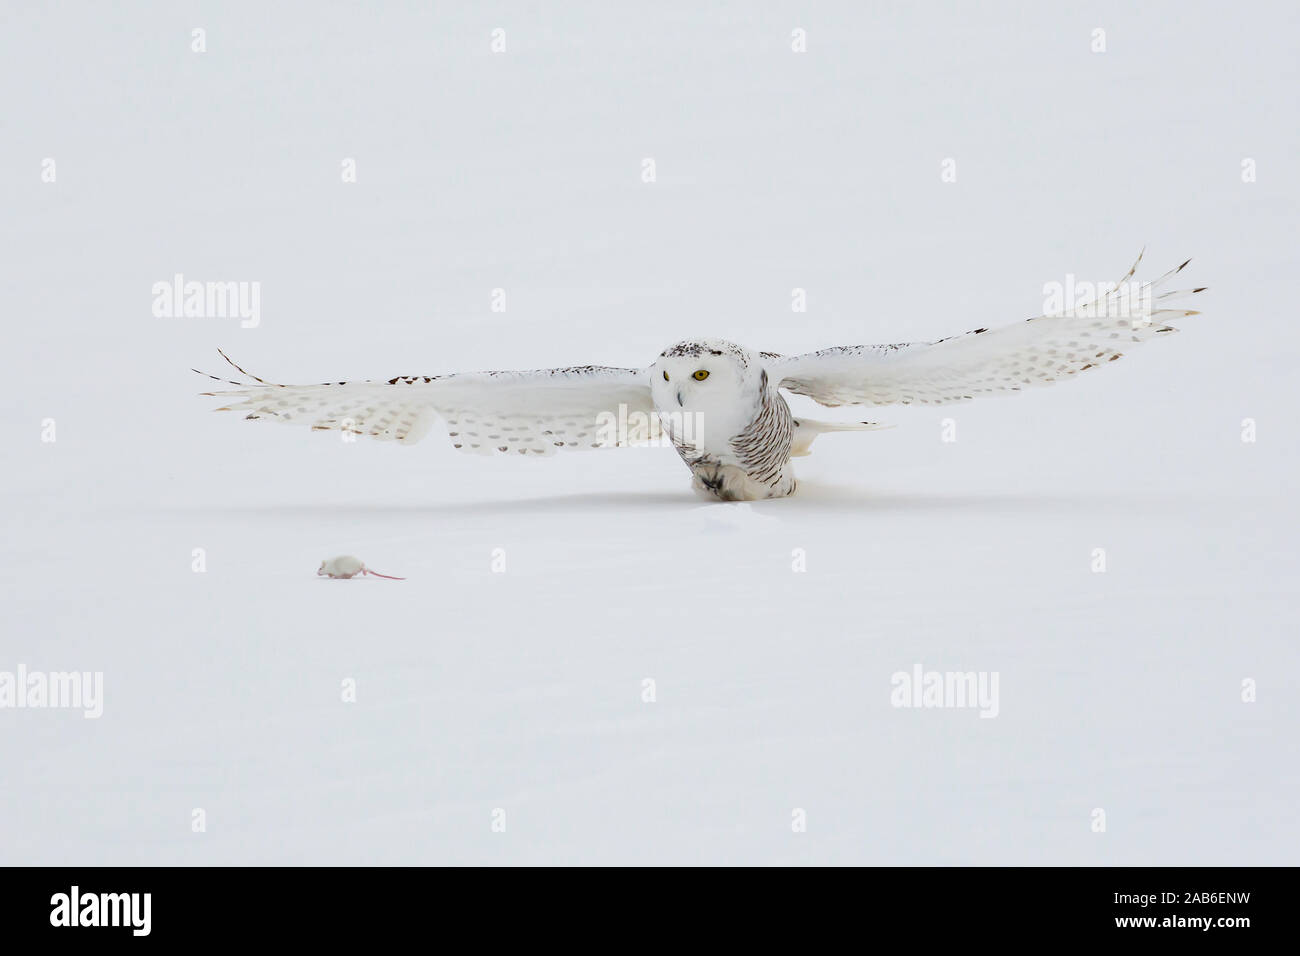 Snowy Owl Hunting a Rodent Stock Photo